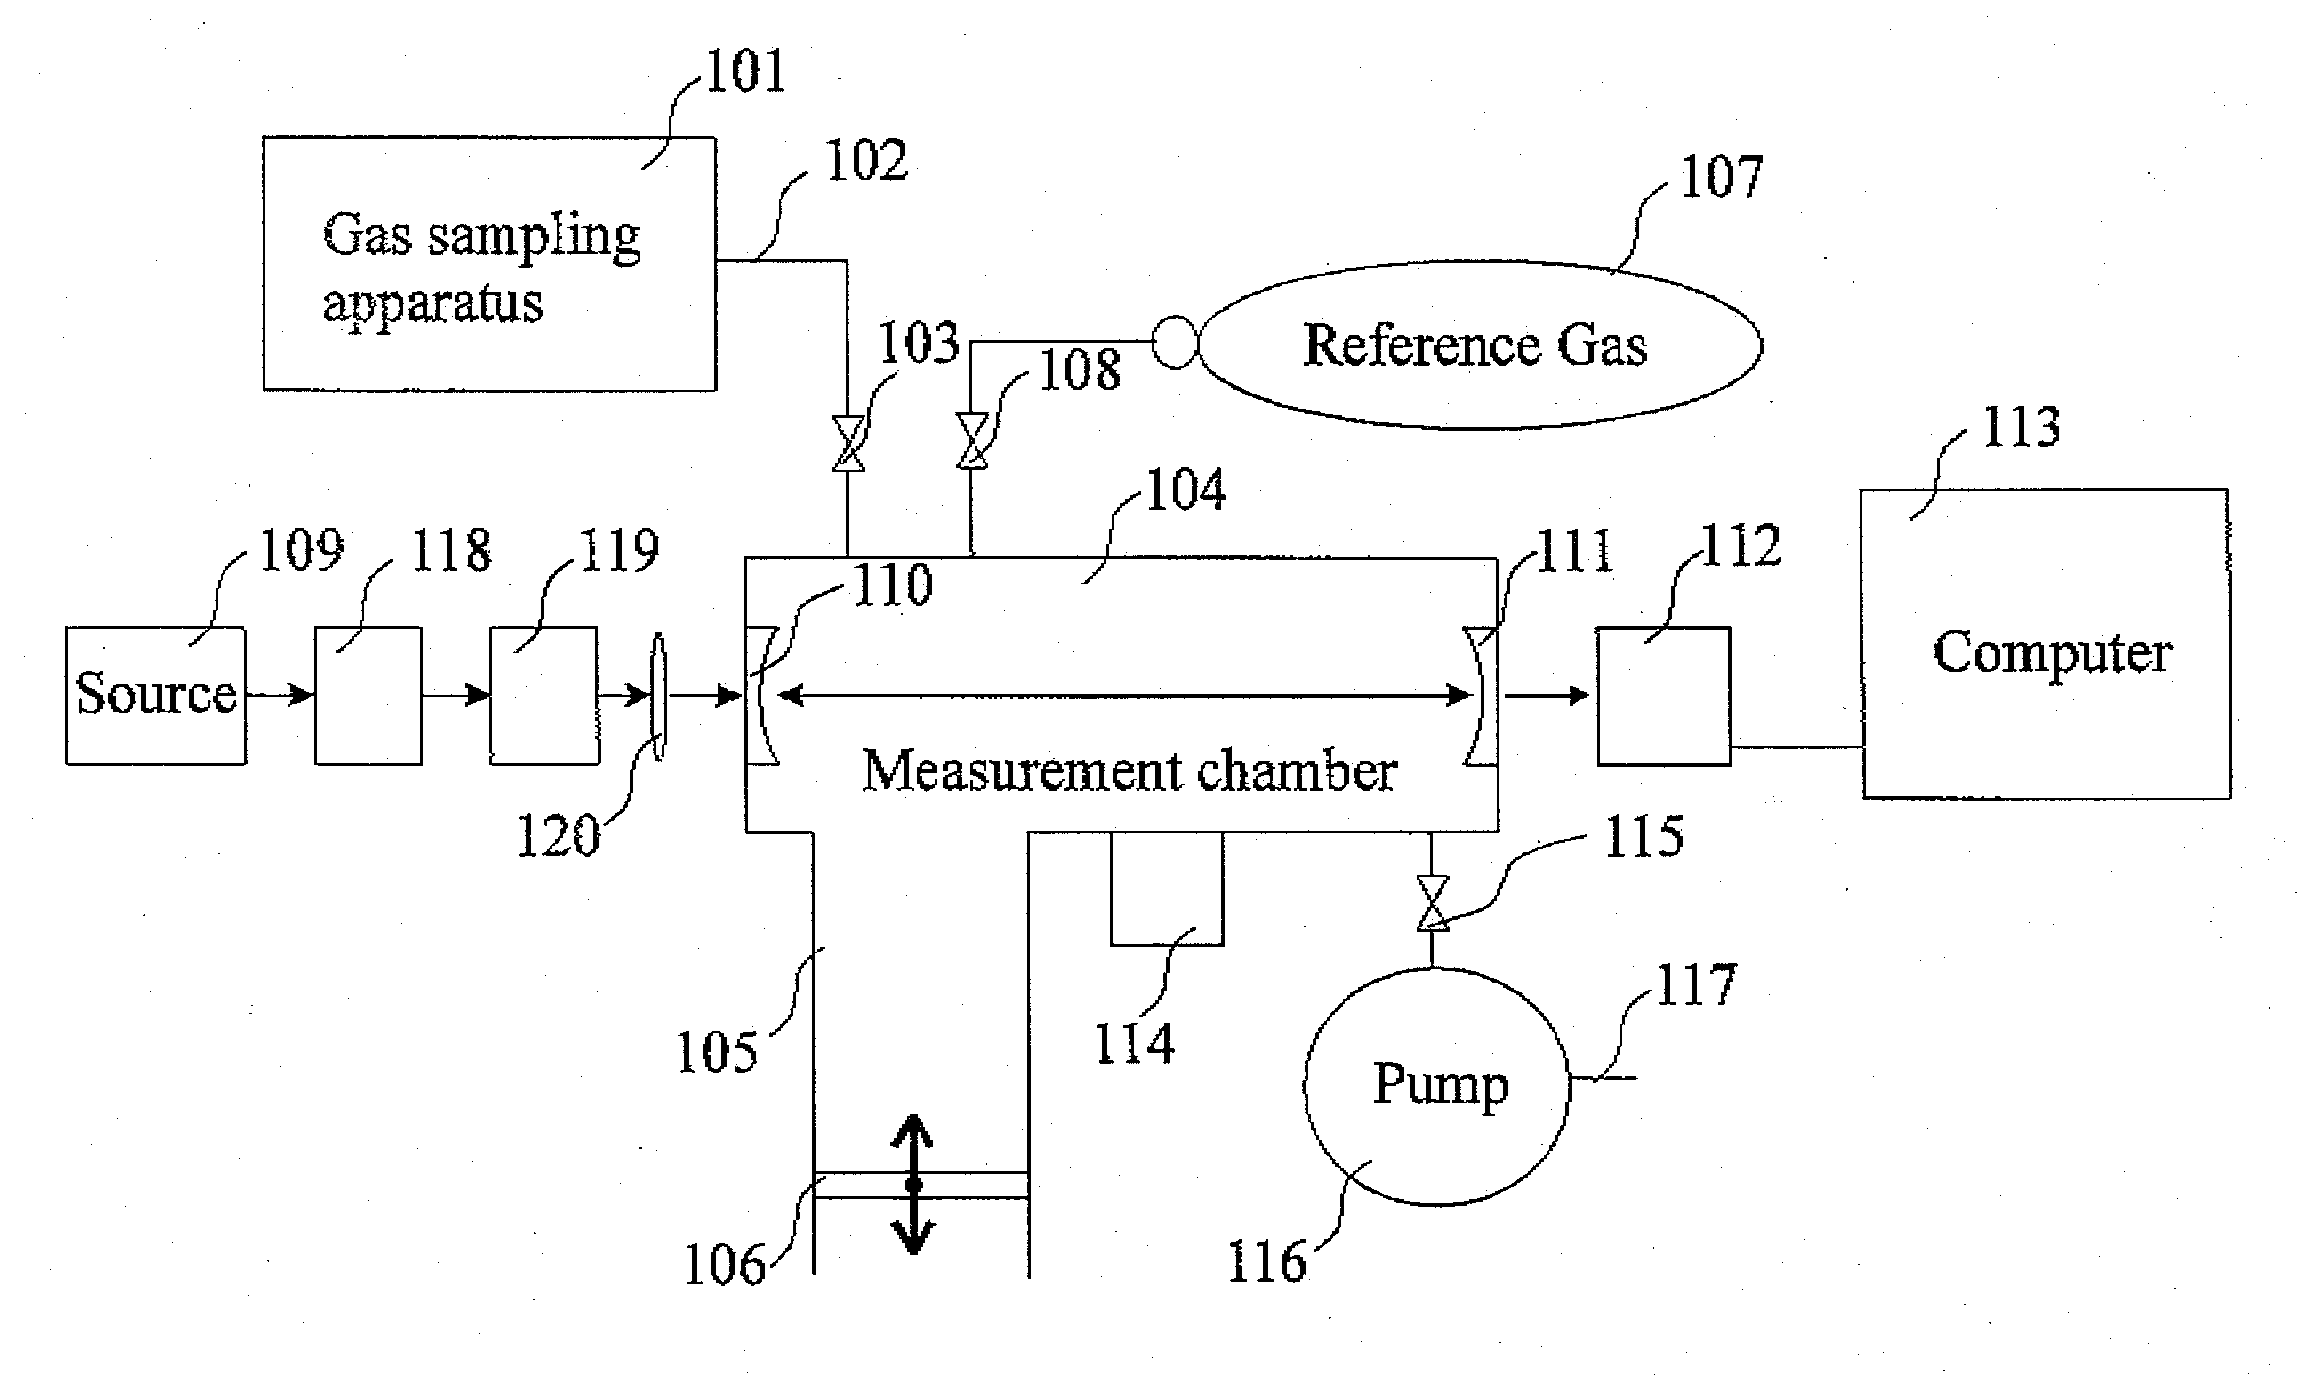 Apparatus and method for rapid and accurate quantification of an unknown, complex mix